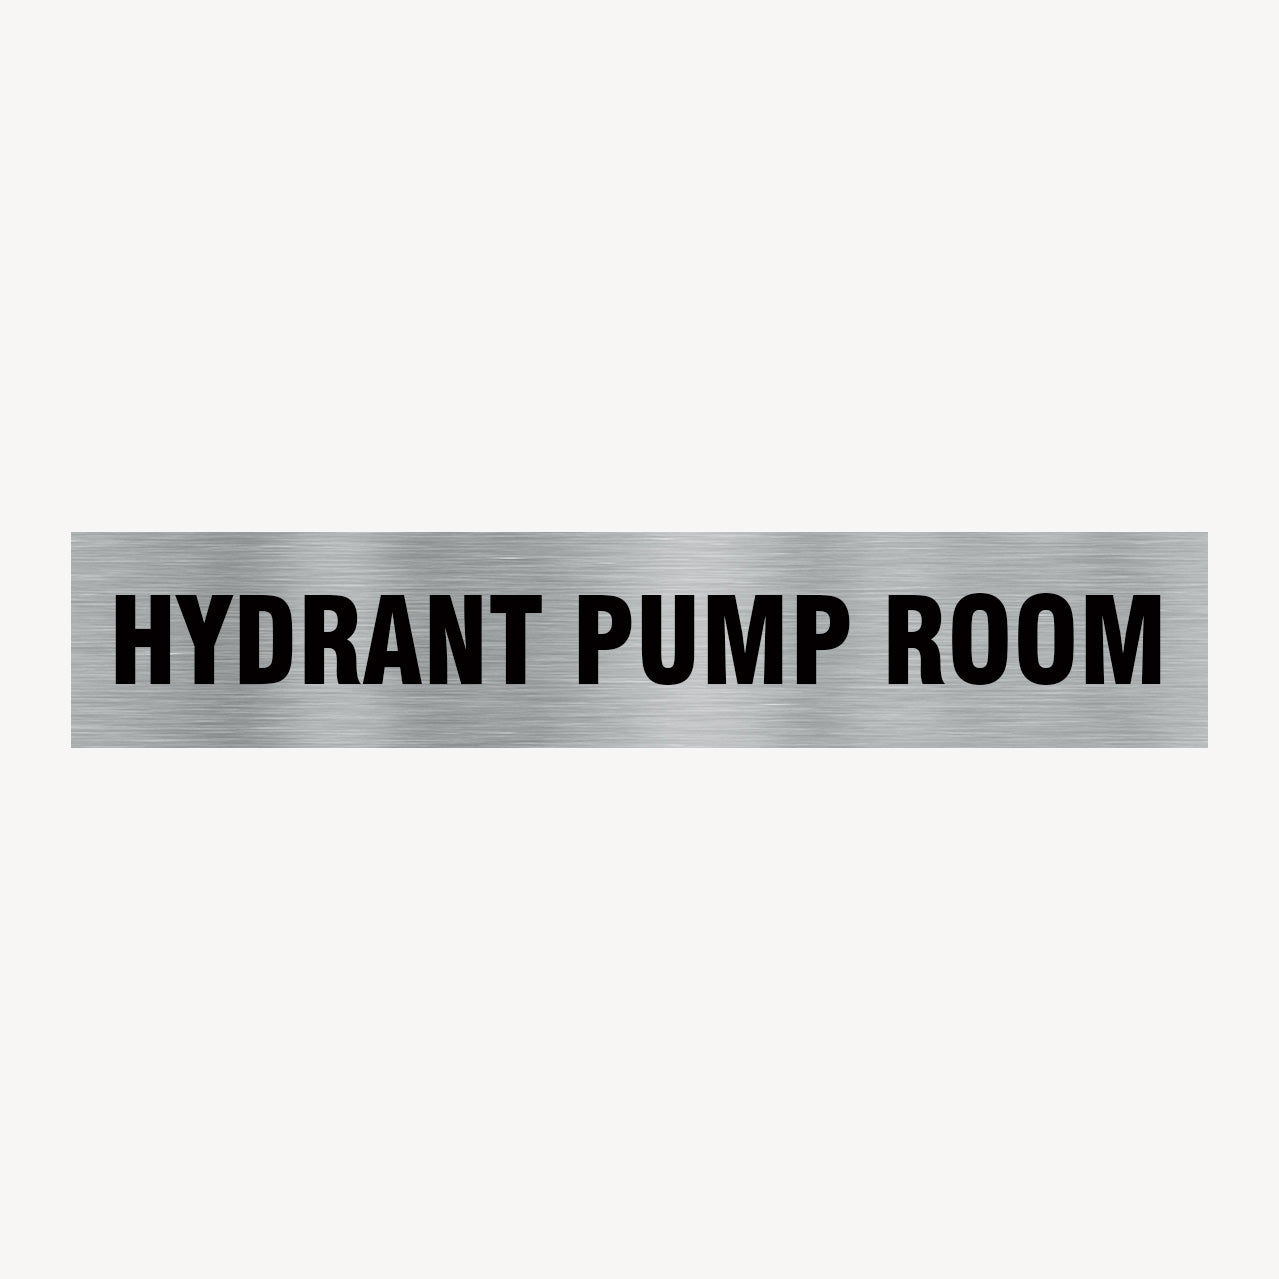 HYDRANT PUMP ROOM SIGN